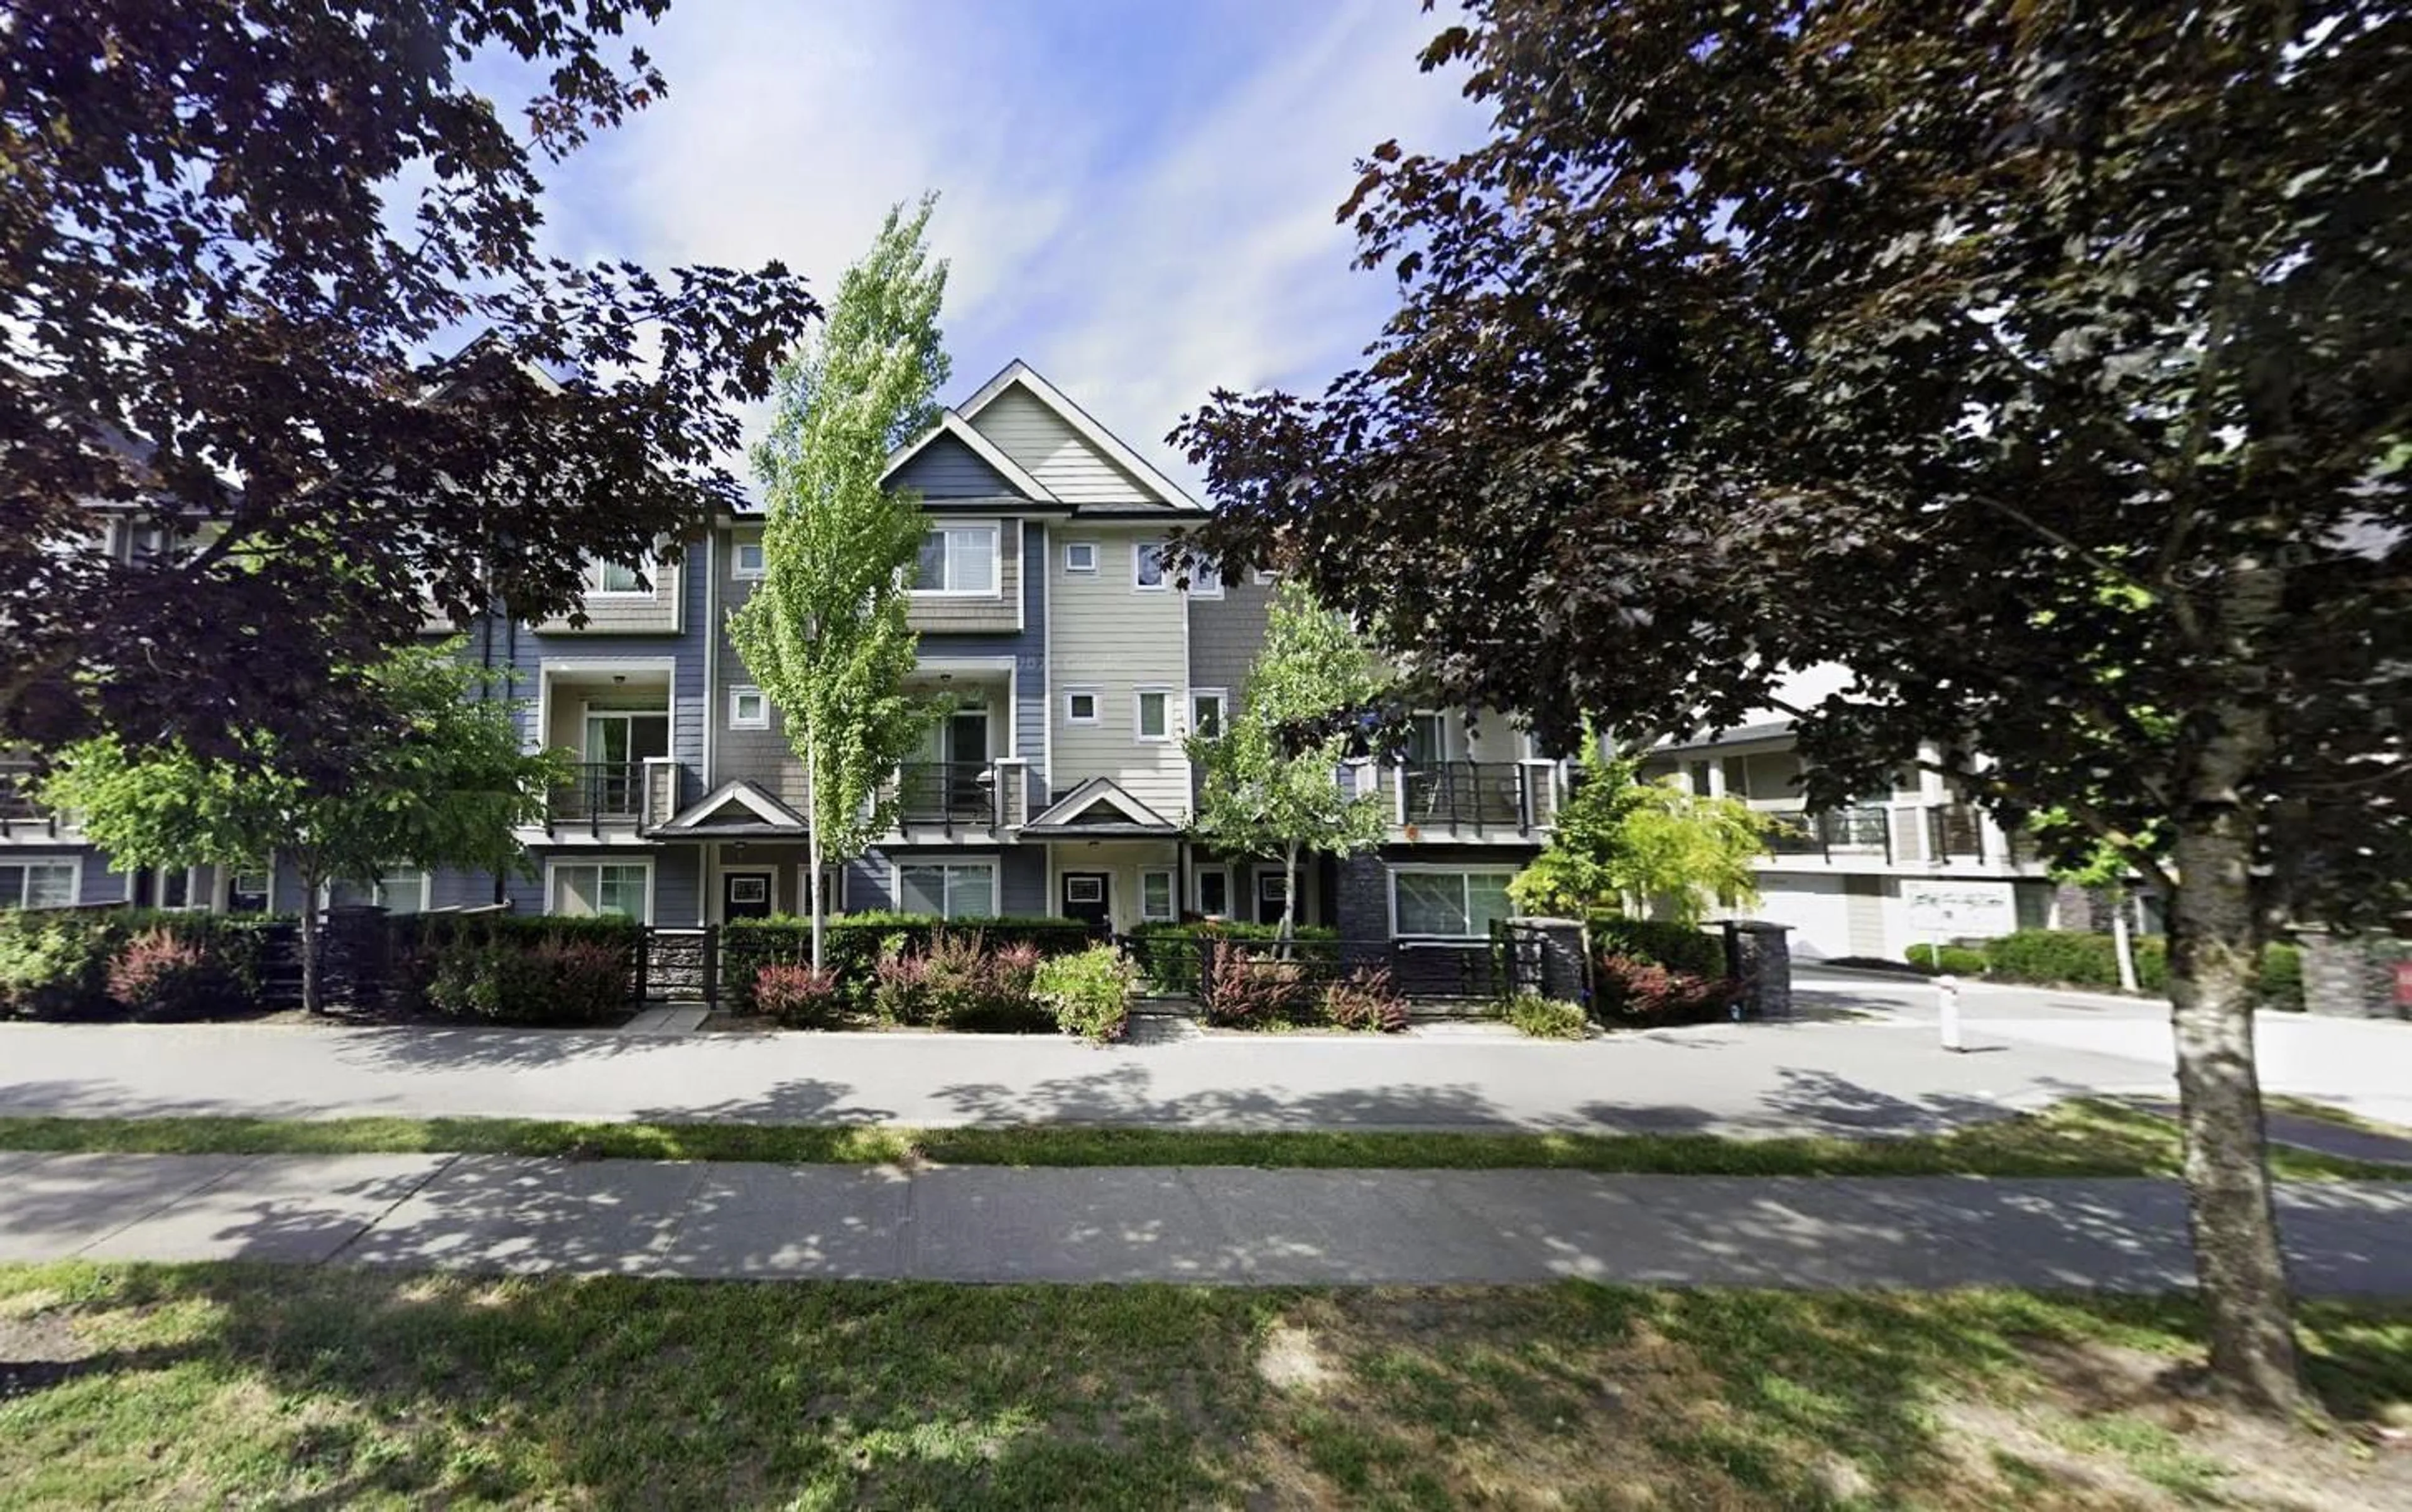 A pic from exterior of the house or condo for 10 14285 64 AVENUE, Surrey British Columbia V3W1Z2